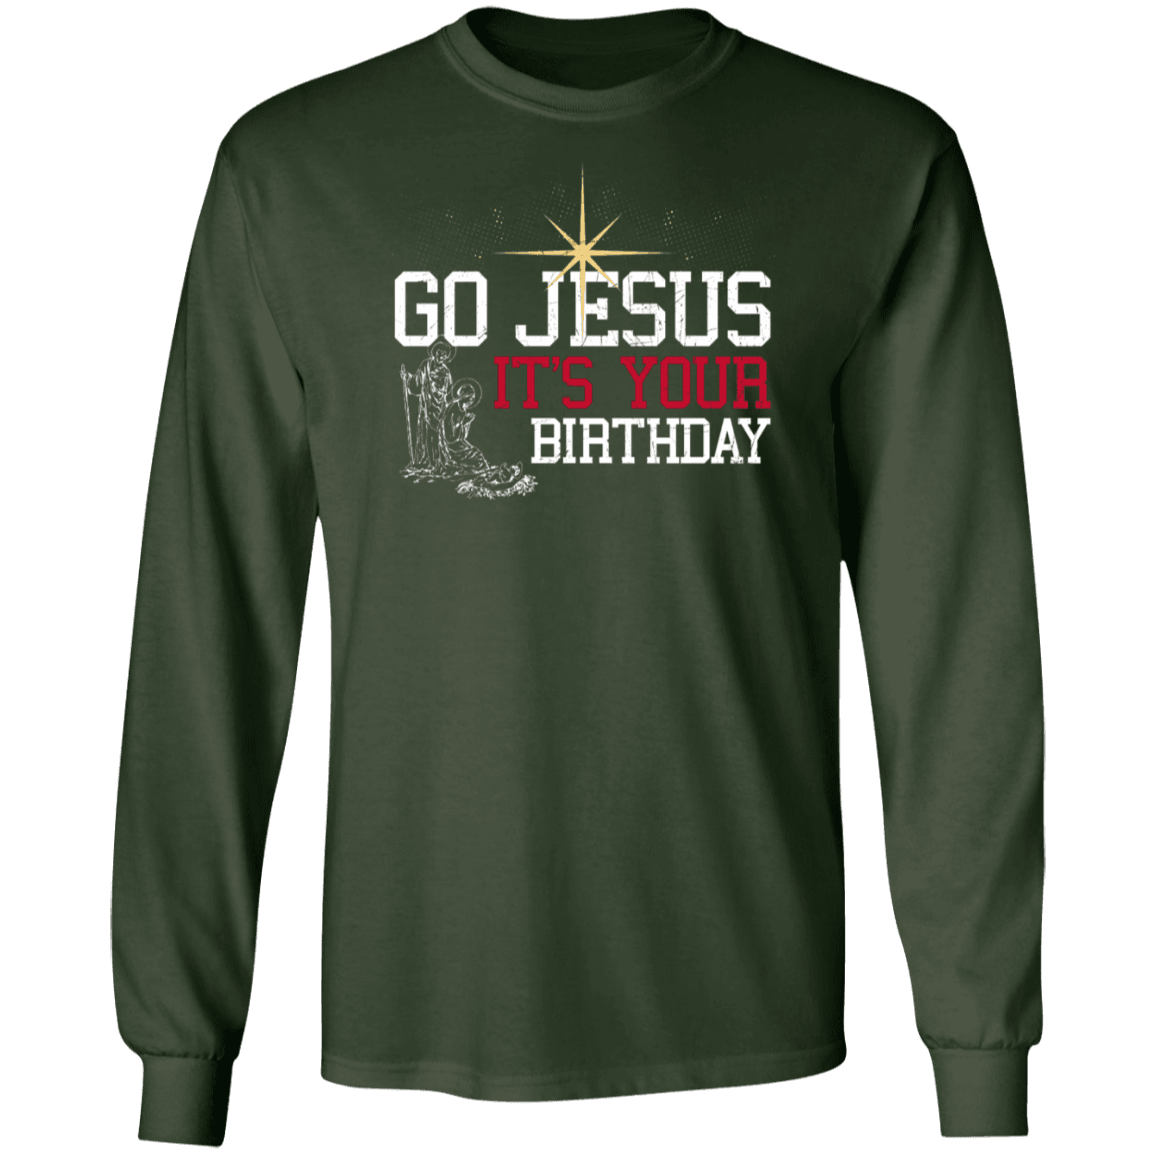 Designs by MyUtopia Shout Out:Go Jesus Its Your Birthday - Ultra Cotton Long Sleeve T-Shirt,Forest Green / S,Long Sleeve T-Shirts